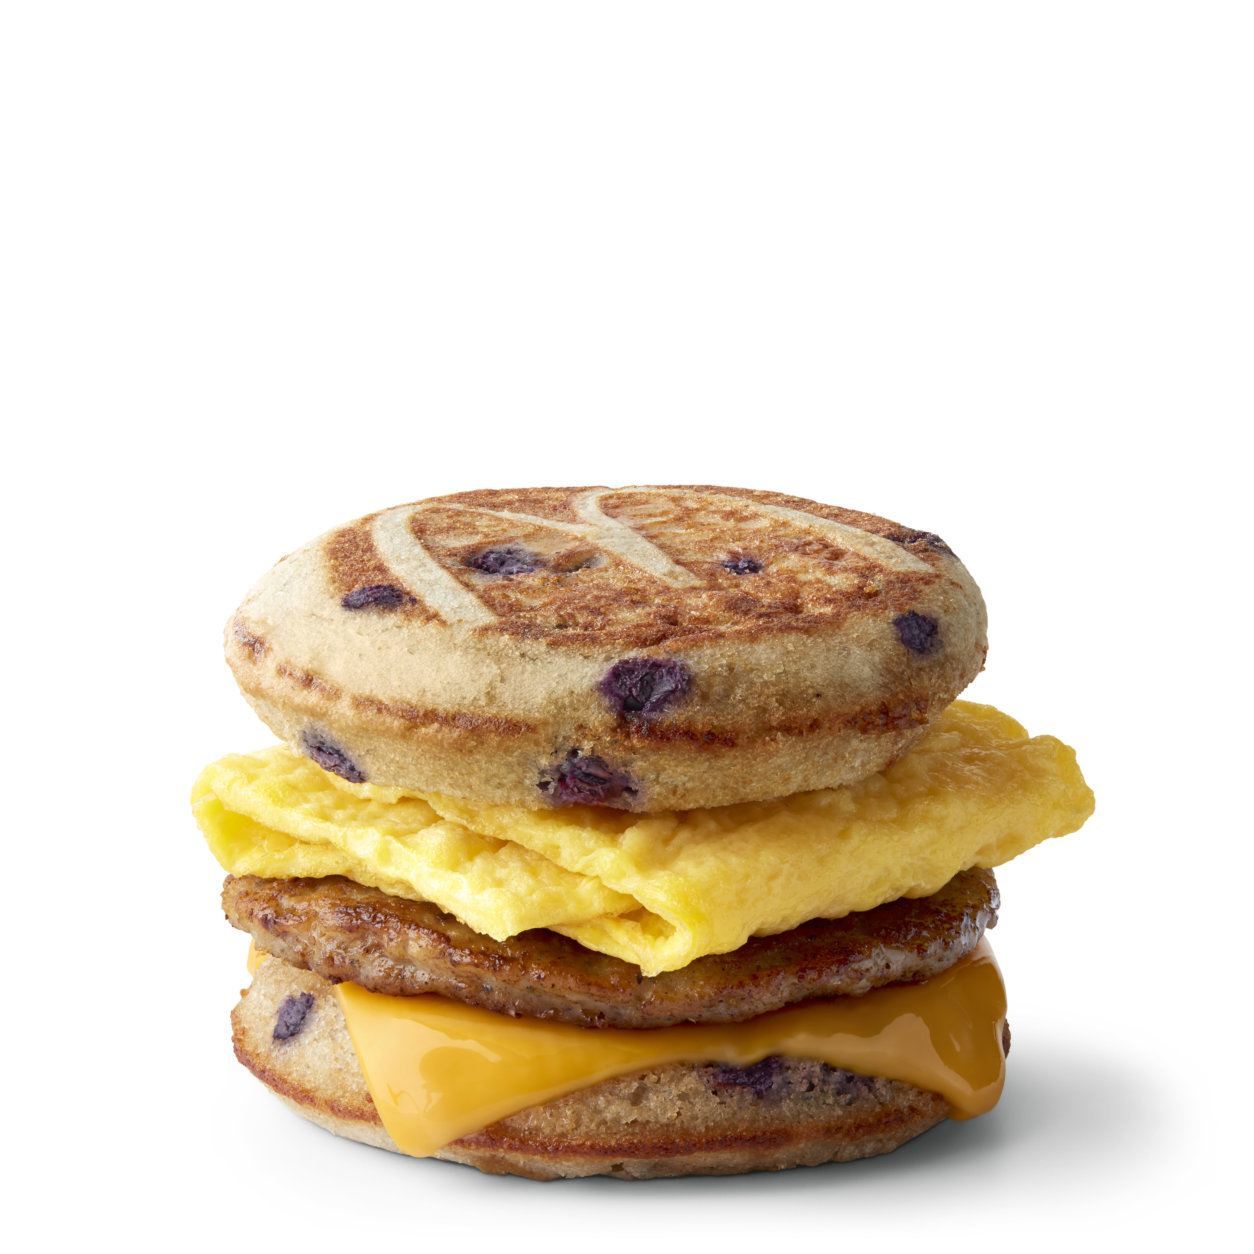 The McGriddles sandwich was first added to the McDonald's menu in 2003. 